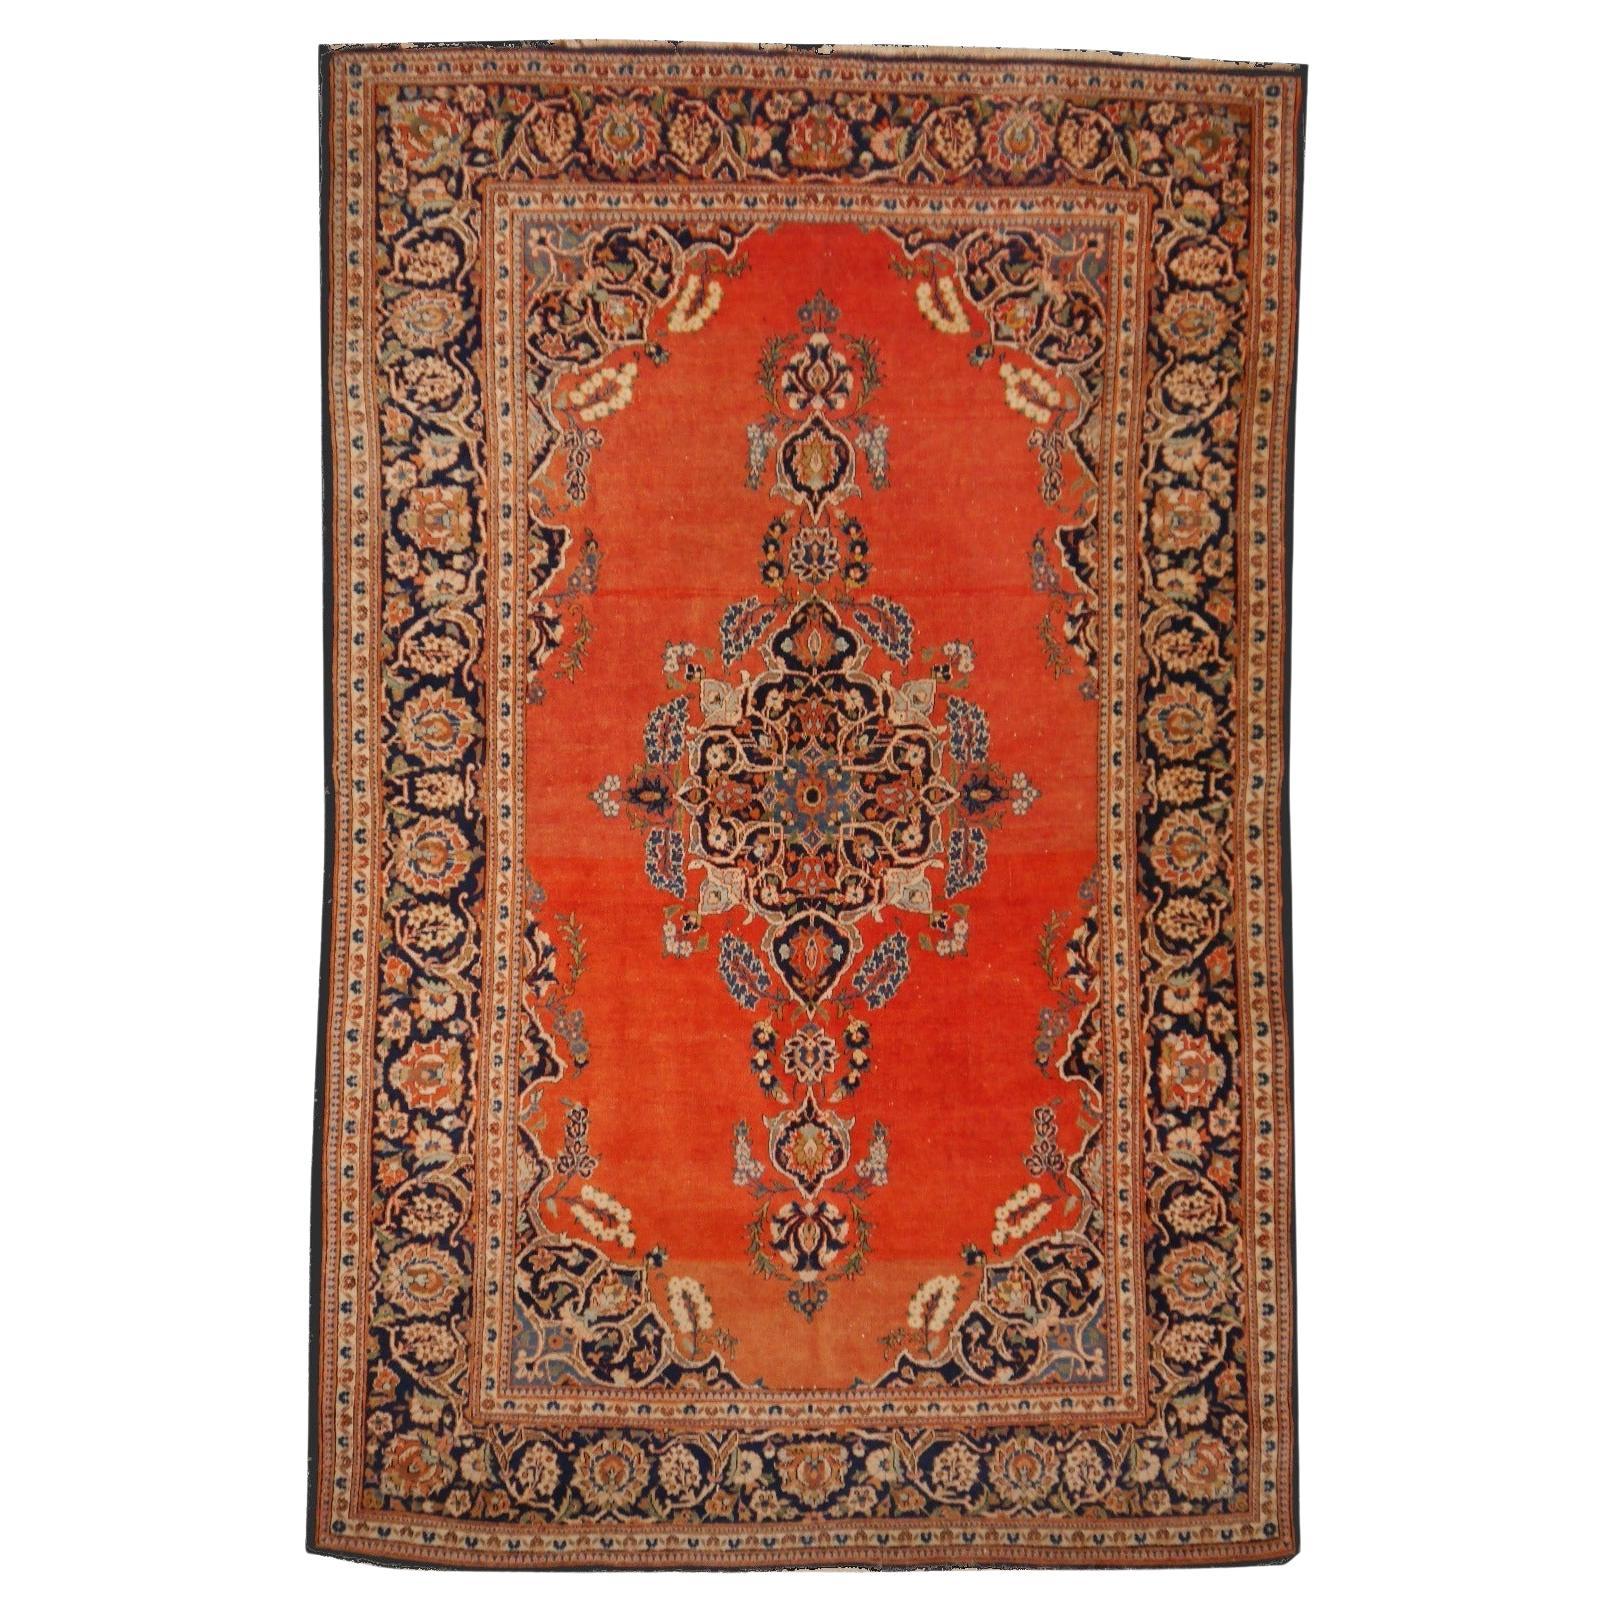 Kashan vintage rug, hand-knotted in salmon and blue - Djoharian Collection